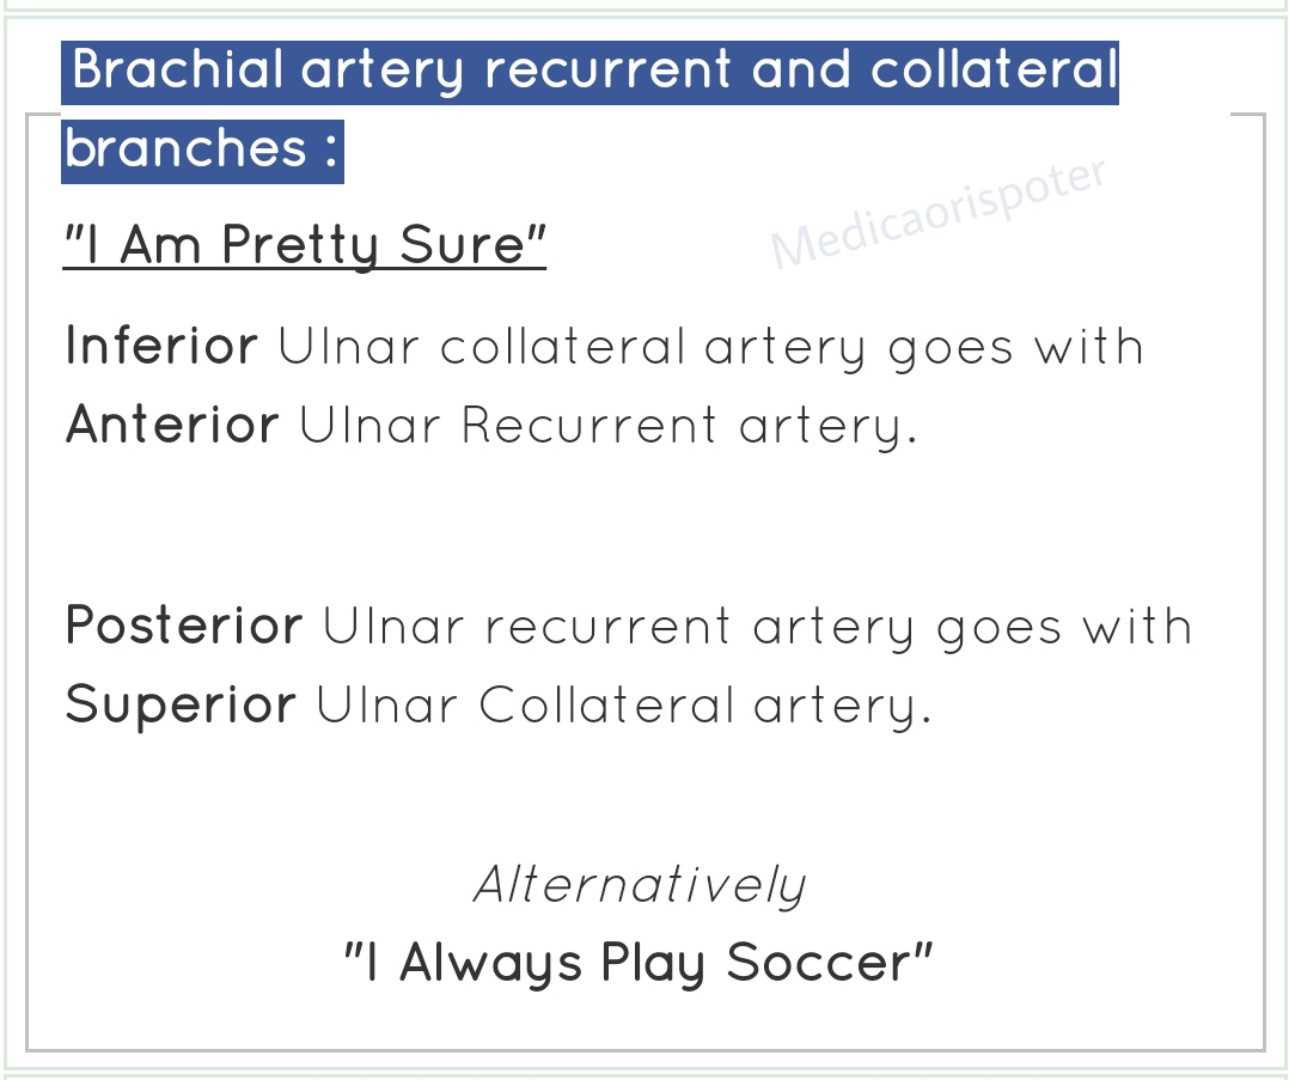 Brachial Artery Recurrent and Collateral branches